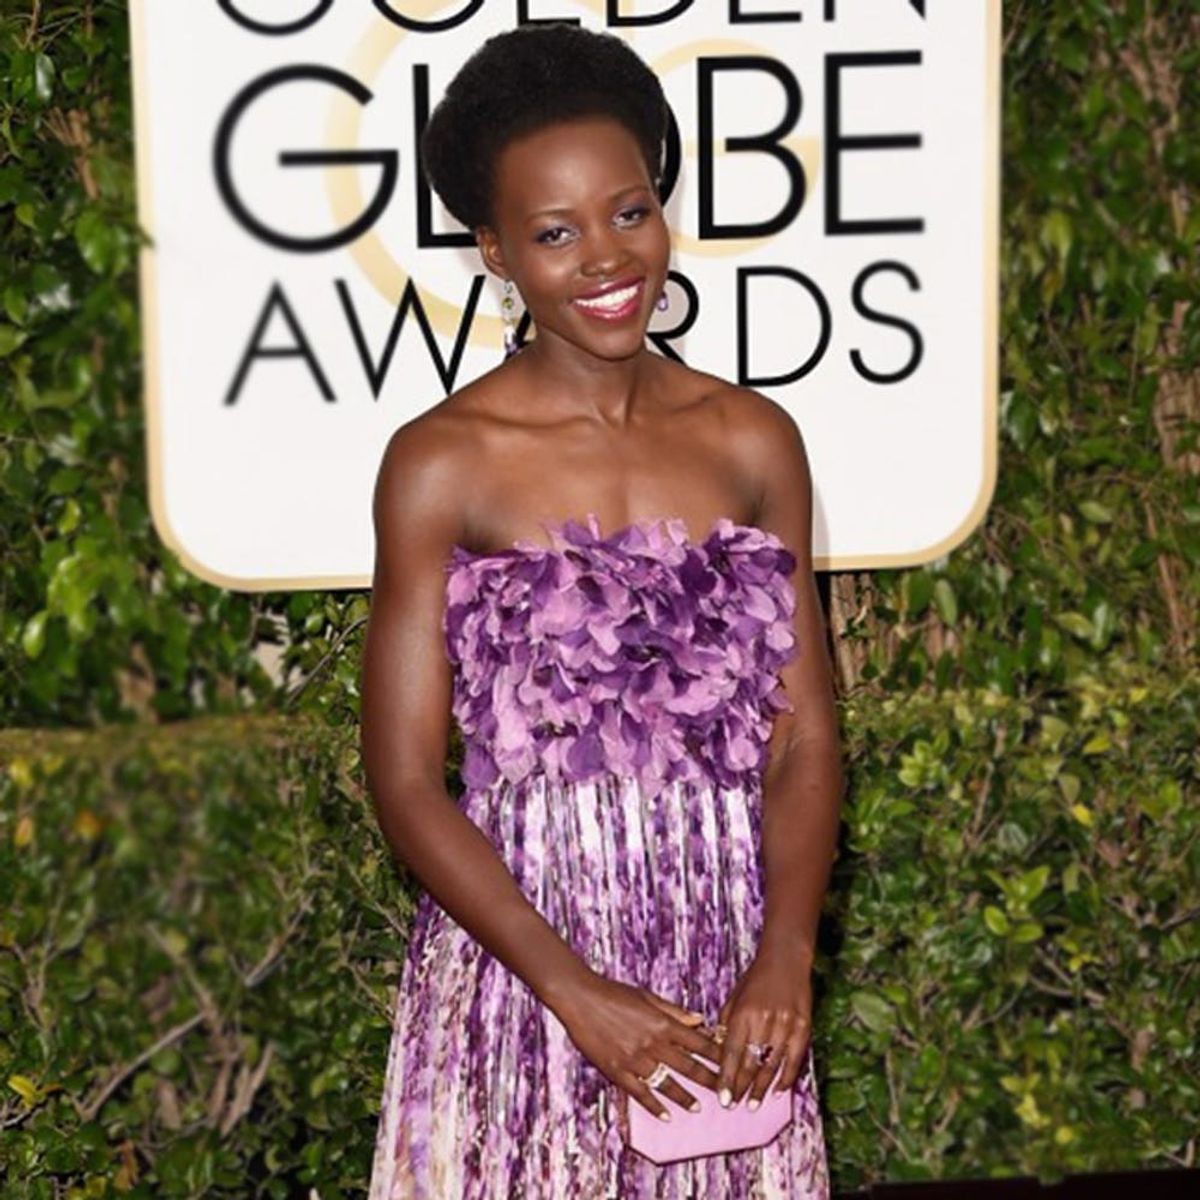 Red Carpet Recap: The Best Dressed at the Golden Globes